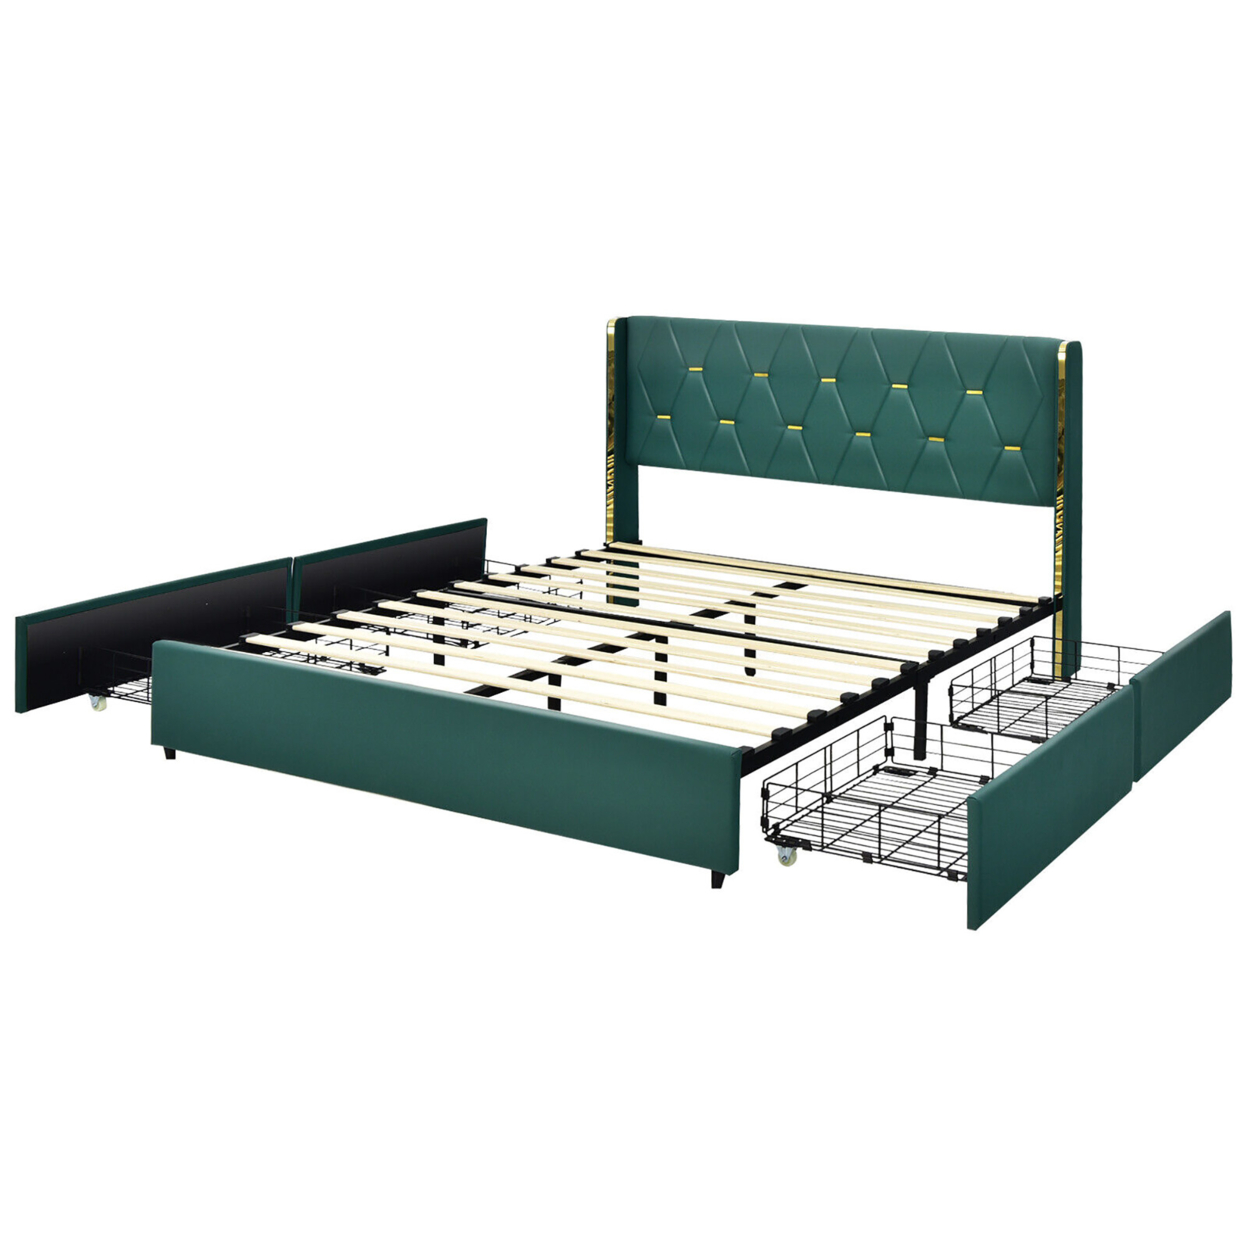 Gymax Queen Upholstered Bed Frame With 4 Storage Drawers PU Leather Headboard Green